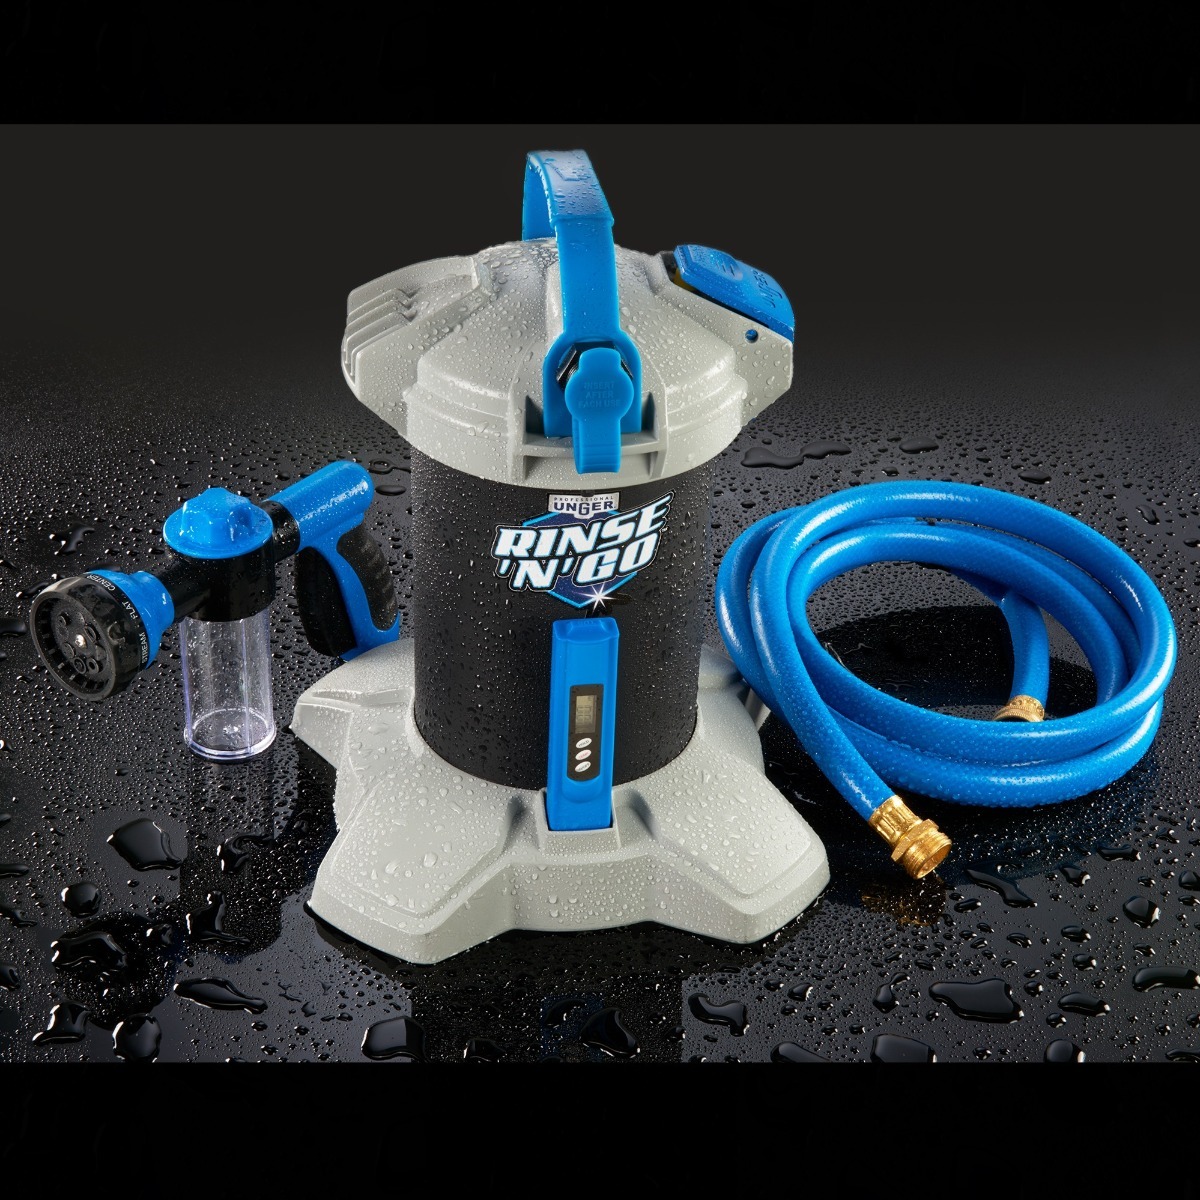 Spot Free Rinse System for Car Wash